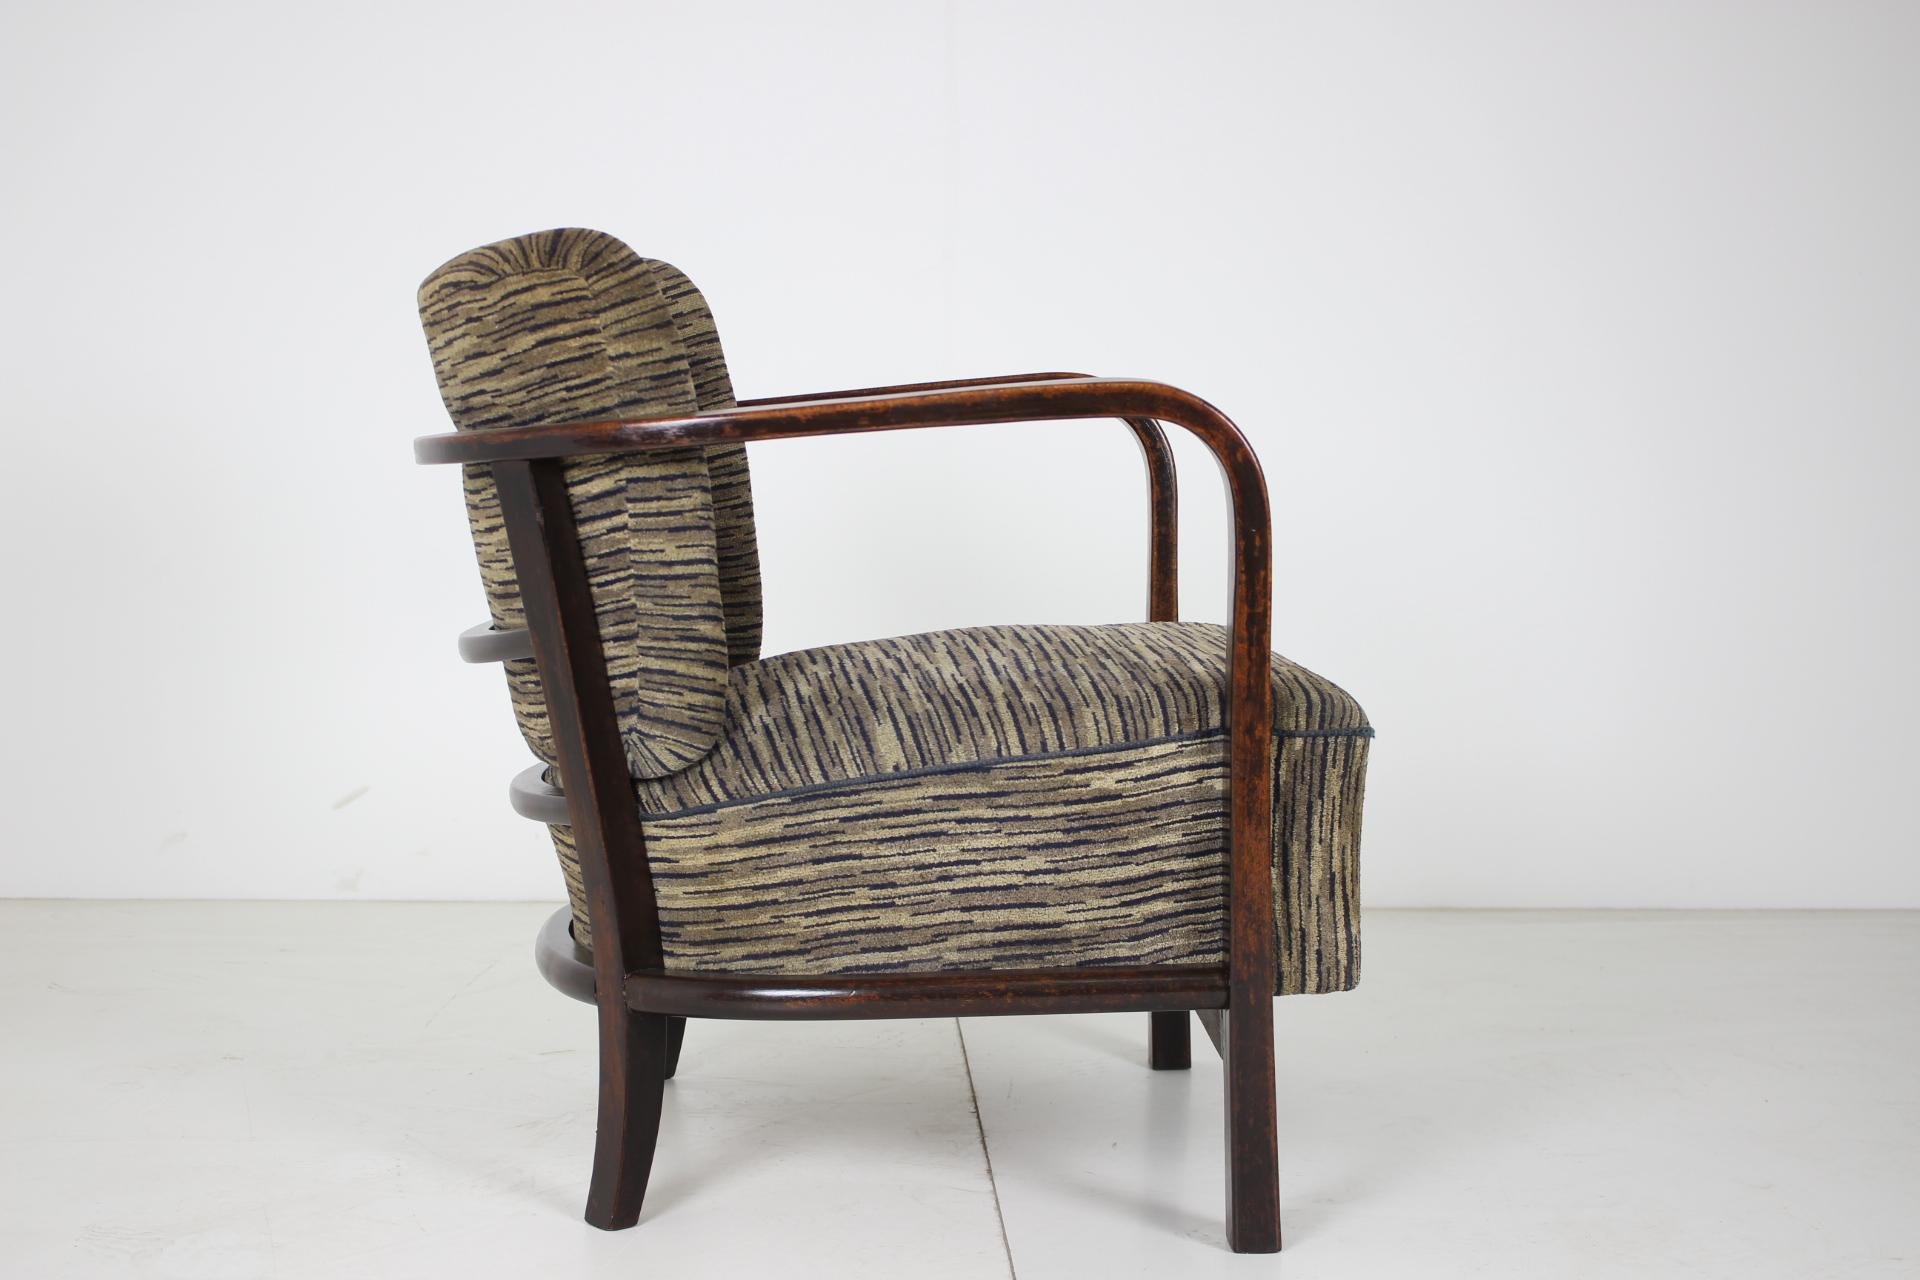 - Made in Czechoslovakia
- Made of wood, fabric
- Suitable for reupholstered
- Good, original condition.